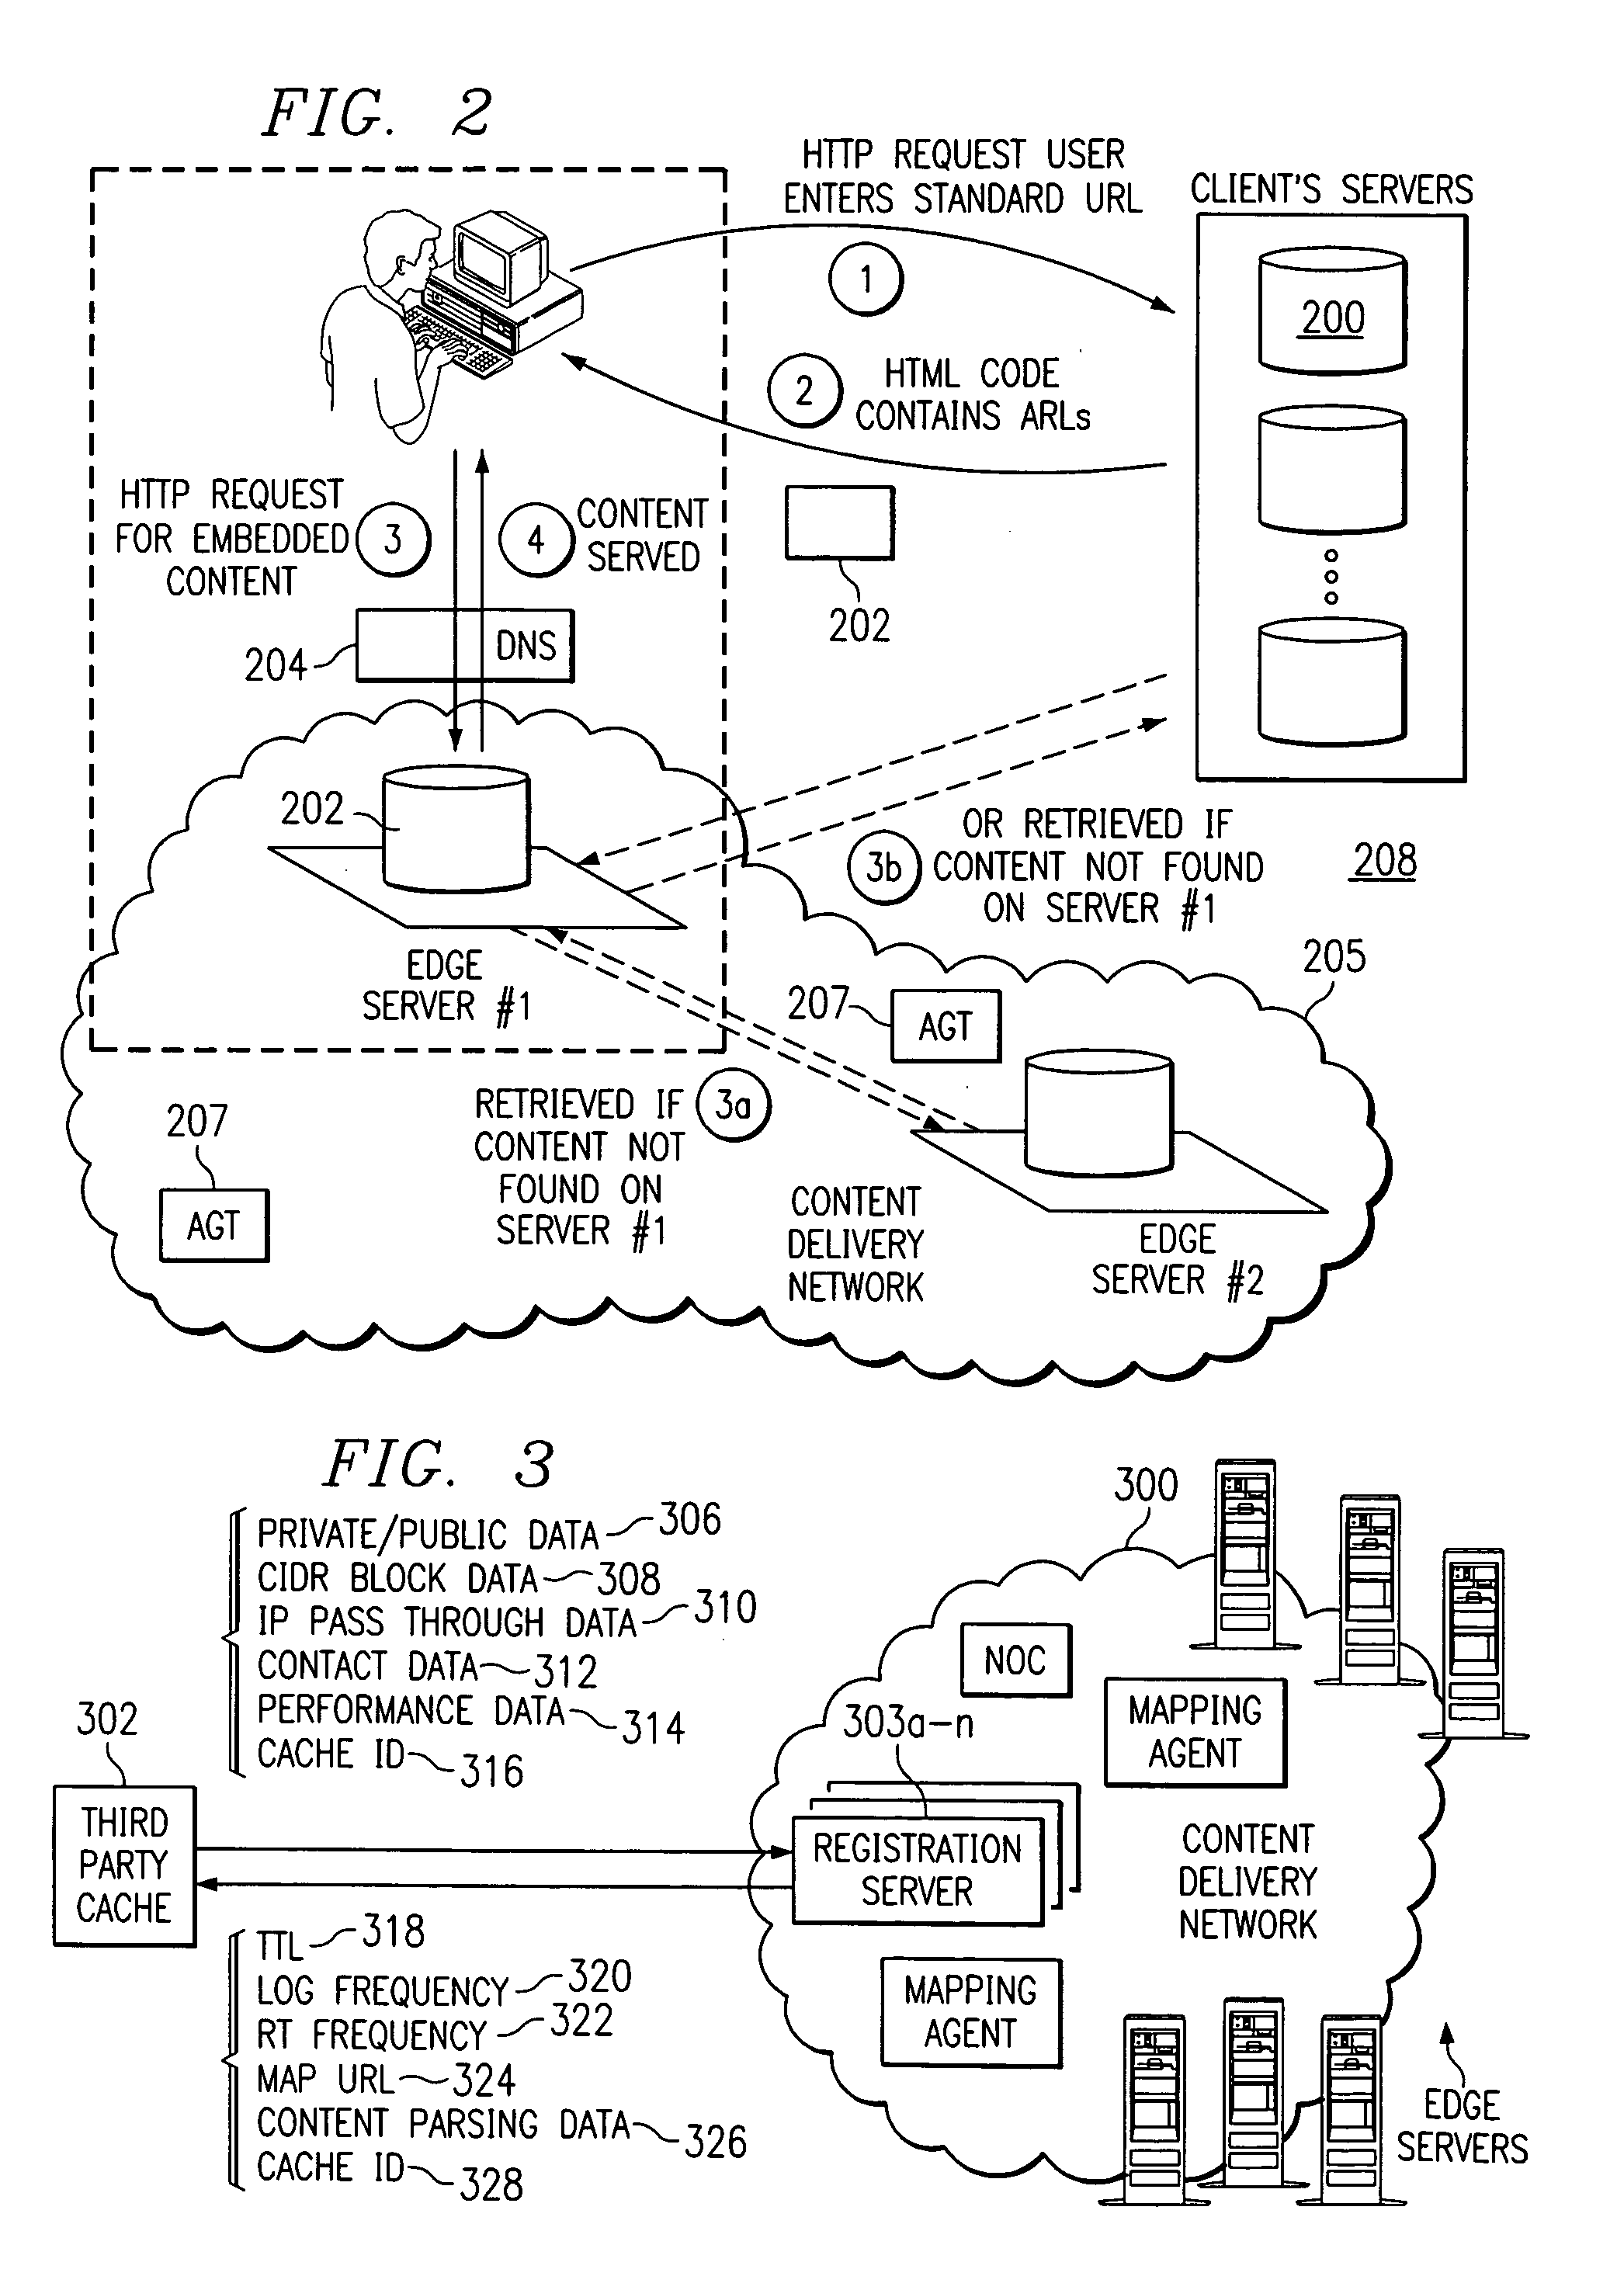 Internet content delivery service with third party cache interface support